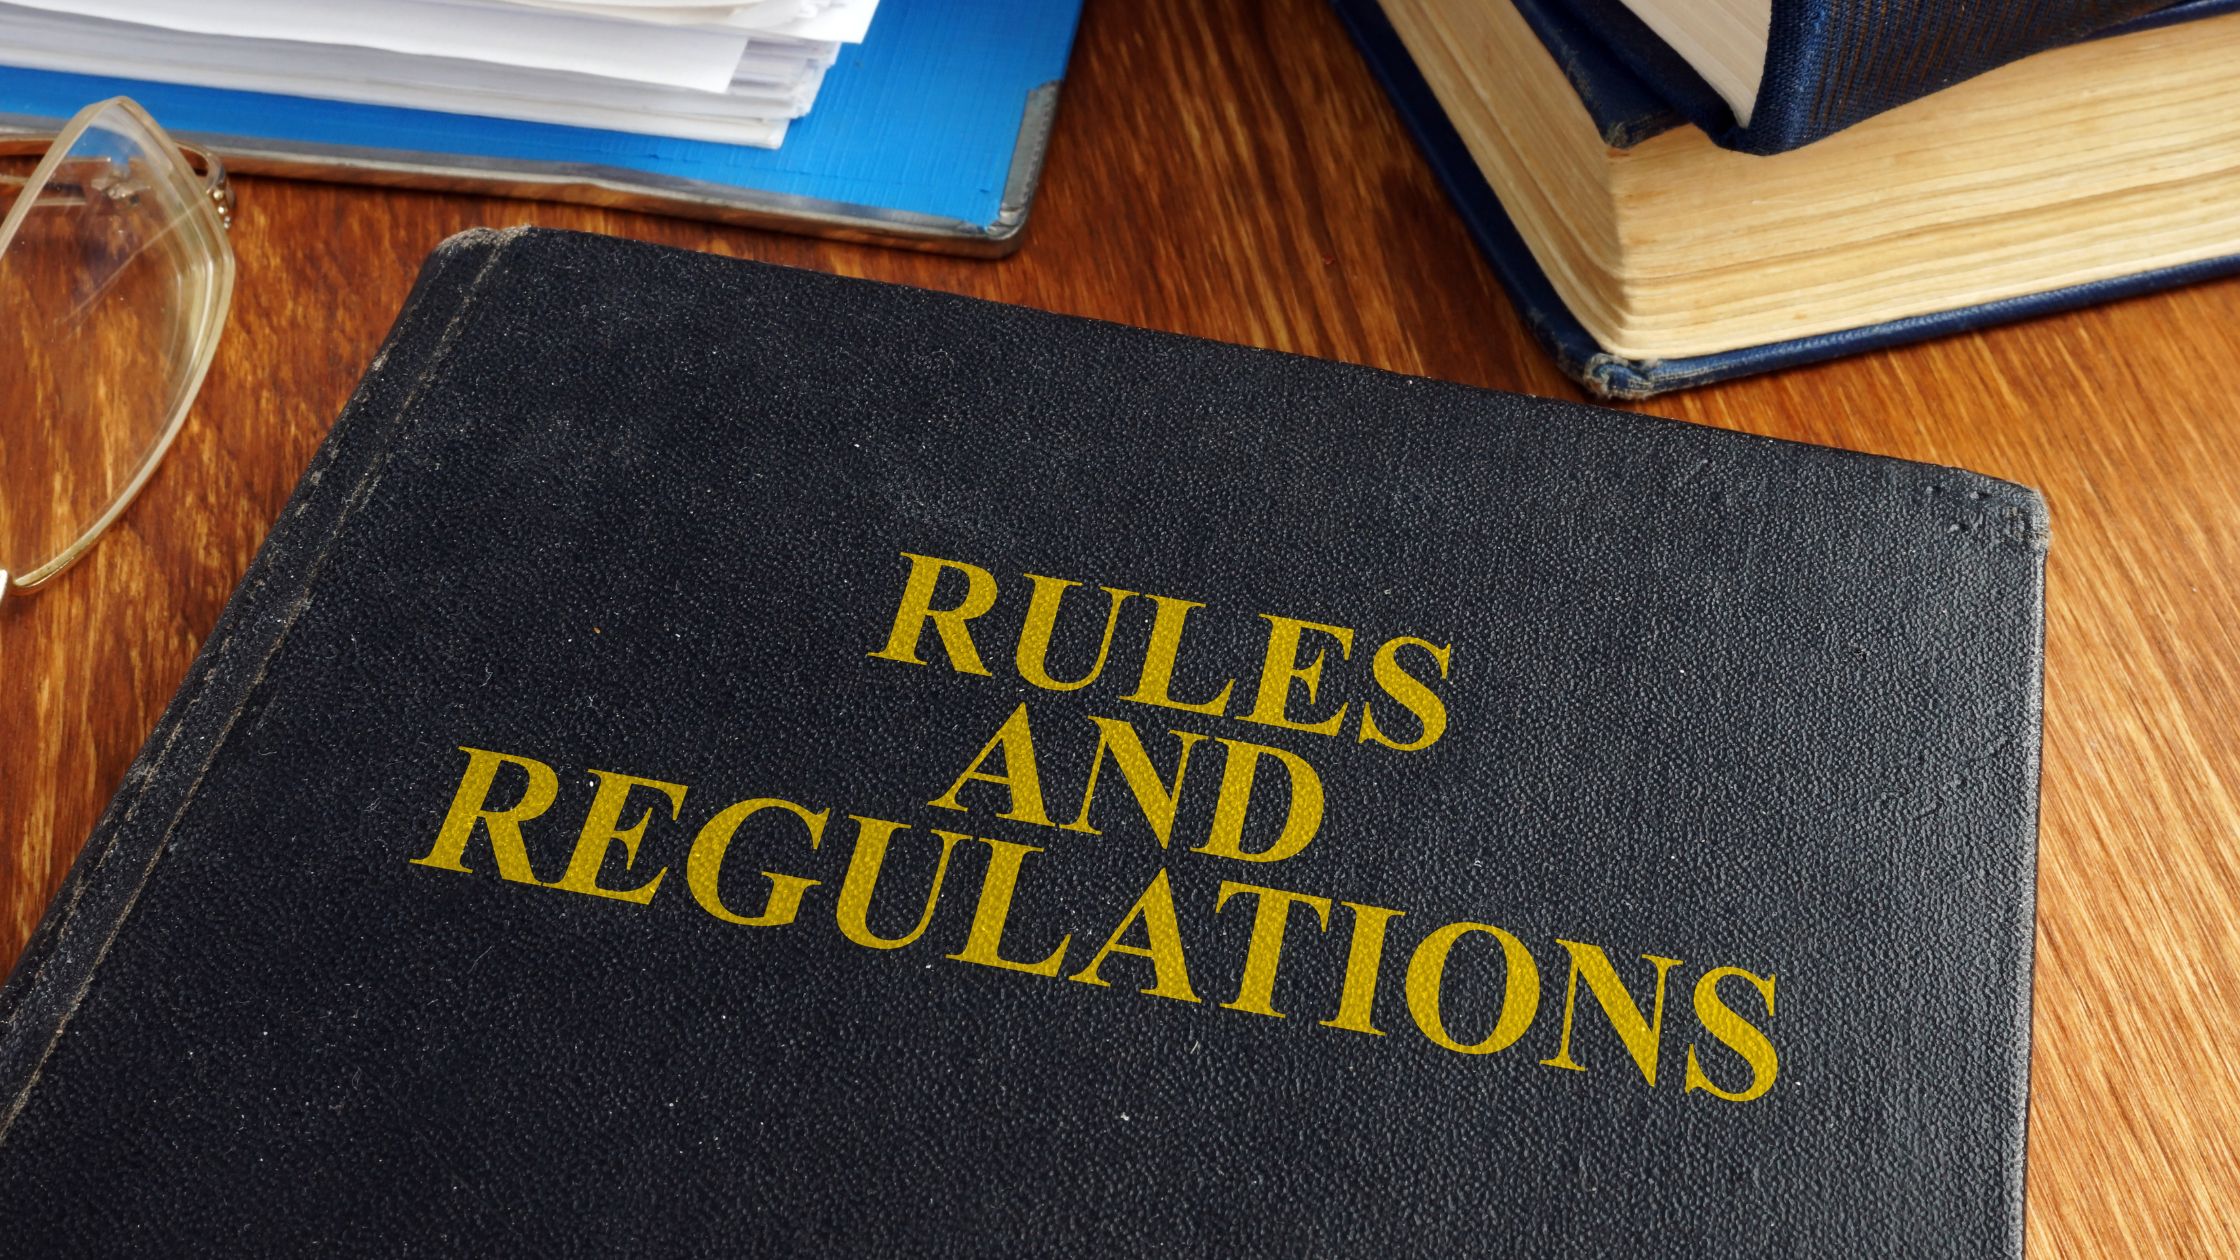 A book titled 'RULES AND REGULATIONS' on a desk, symbolizing the federal regulations for truck drivers that could influence a legal case.